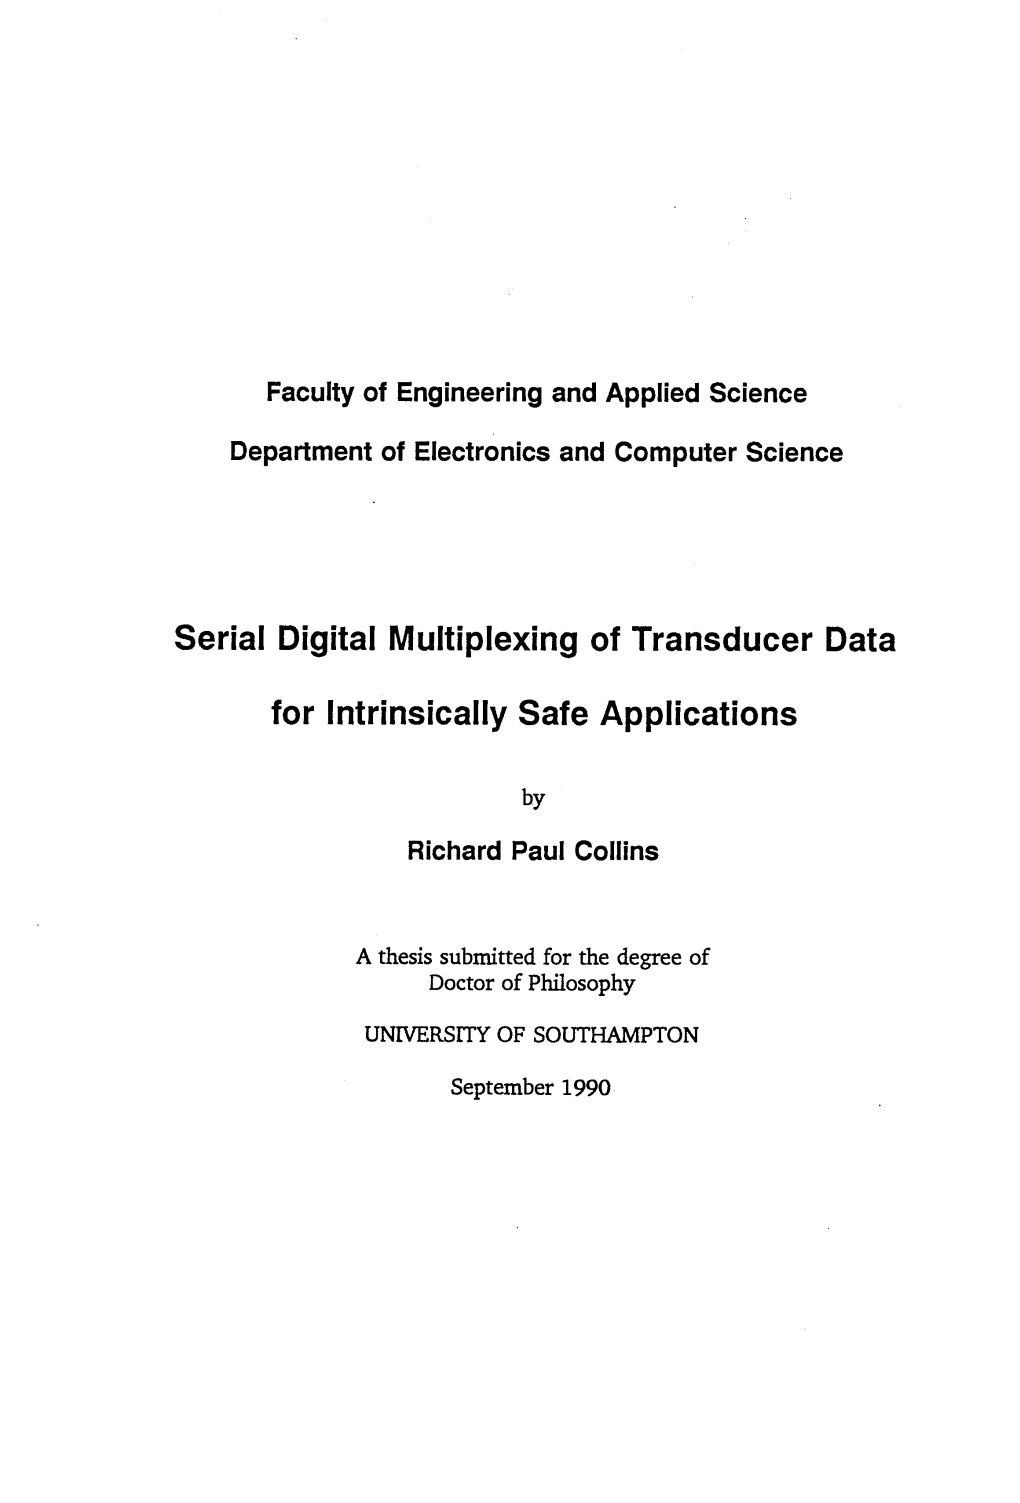 SERIAL DIGITAL MULTIPLEXING of TRANSDUCER DATA for INTRINSICALLY SAFE APPLICATIONS by Richard Paul Collins